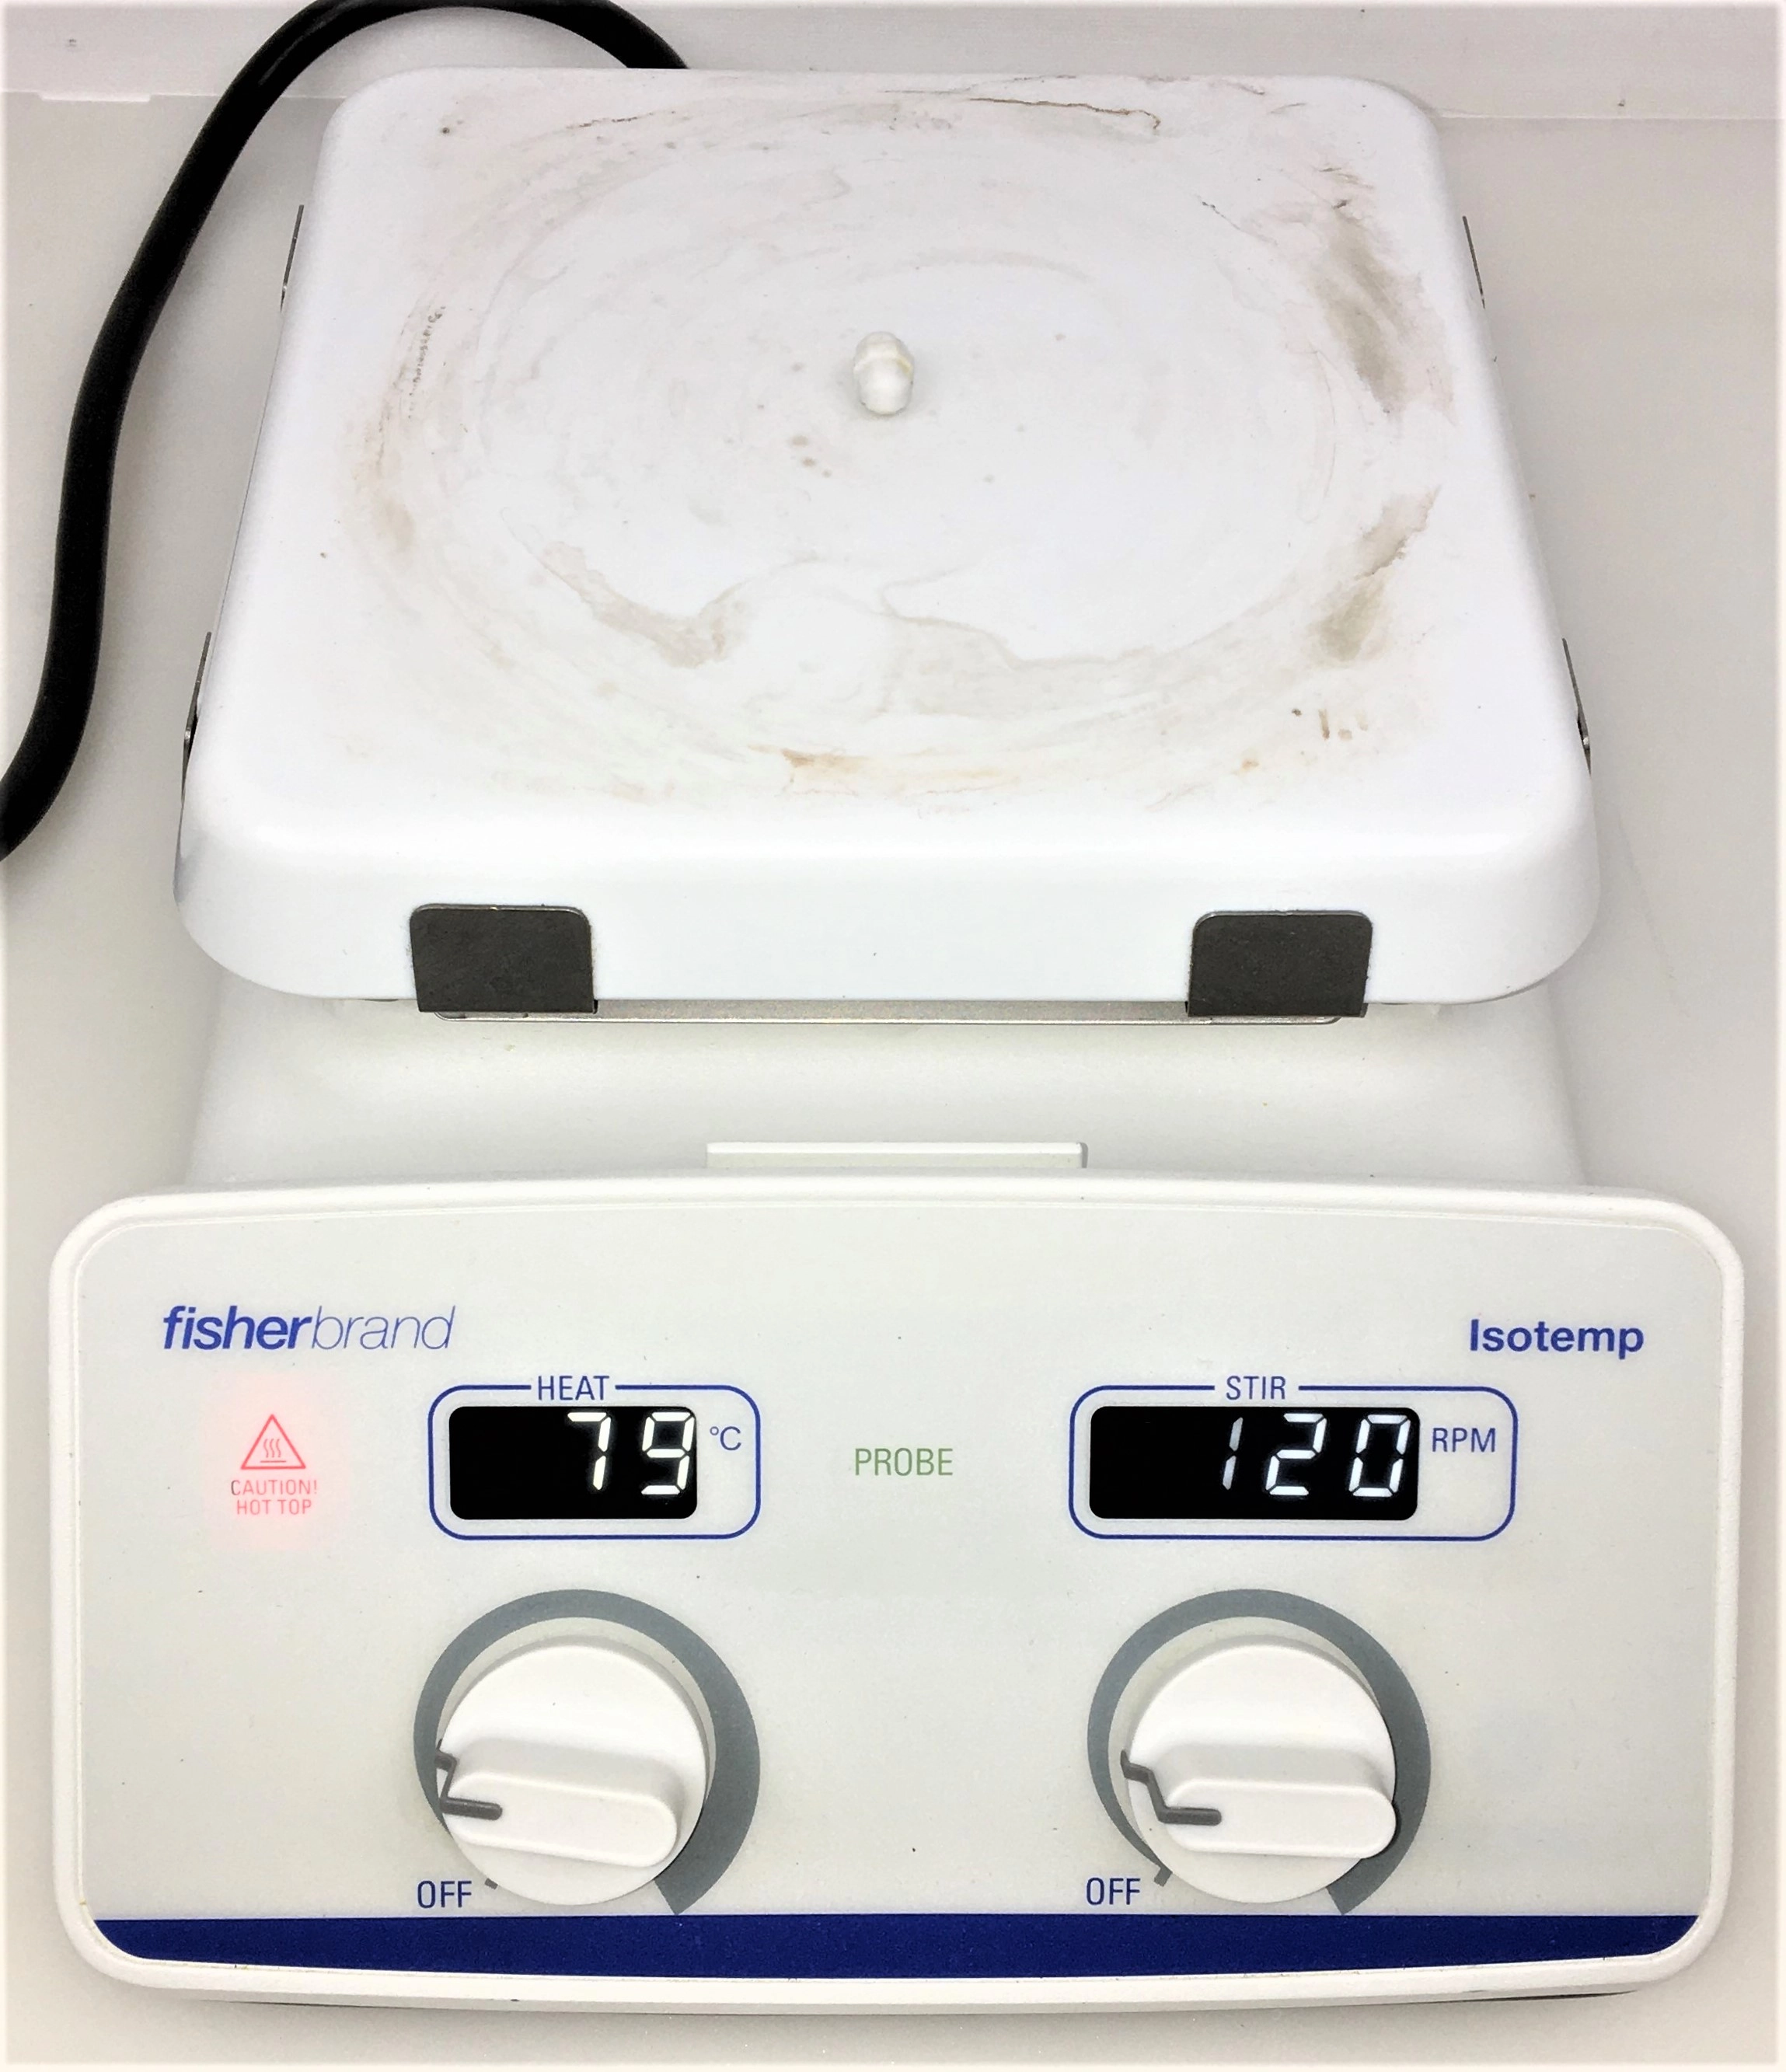 Thermo Scientific Hot Plate Stirrer - The Lab World Group